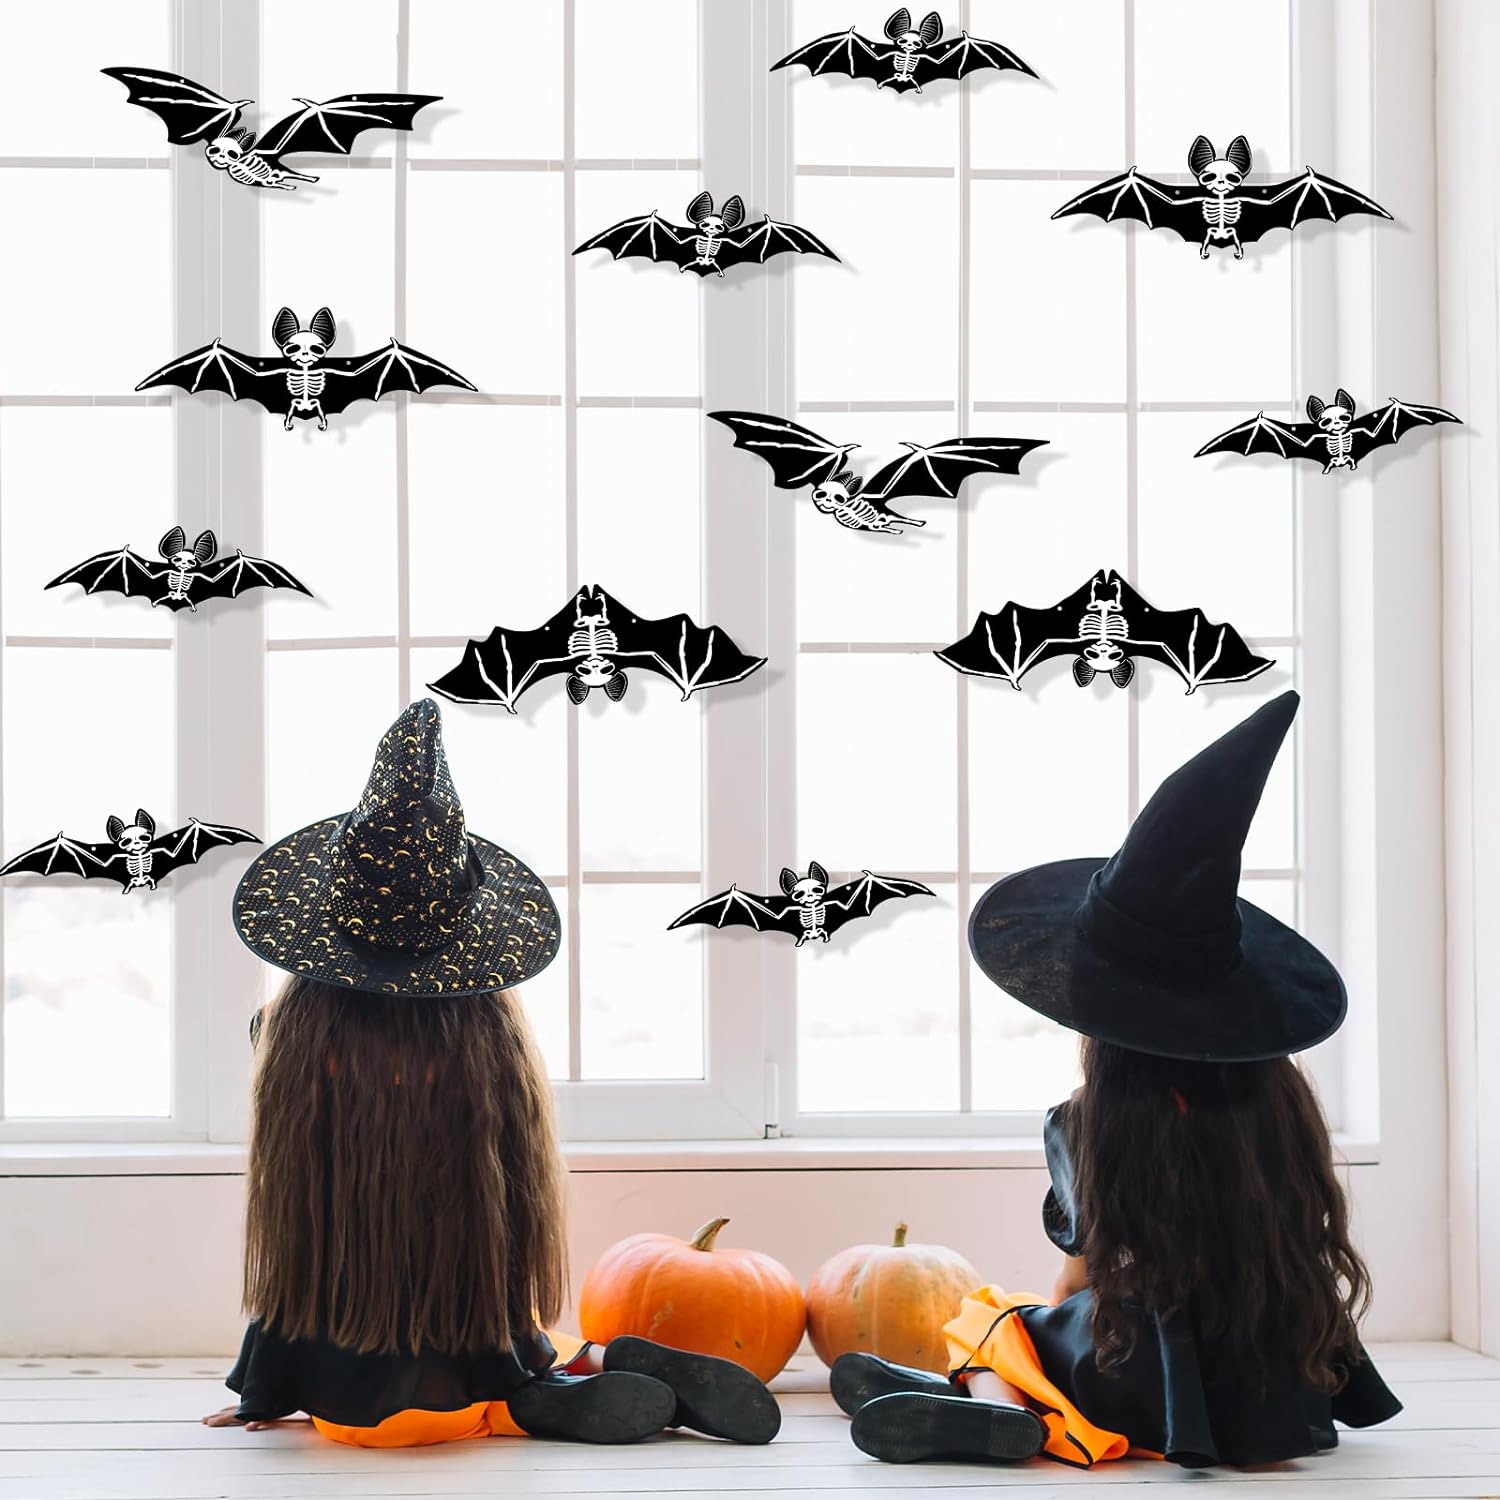 Hanging Bats Halloween Decoration Review - Discover Awesome Products